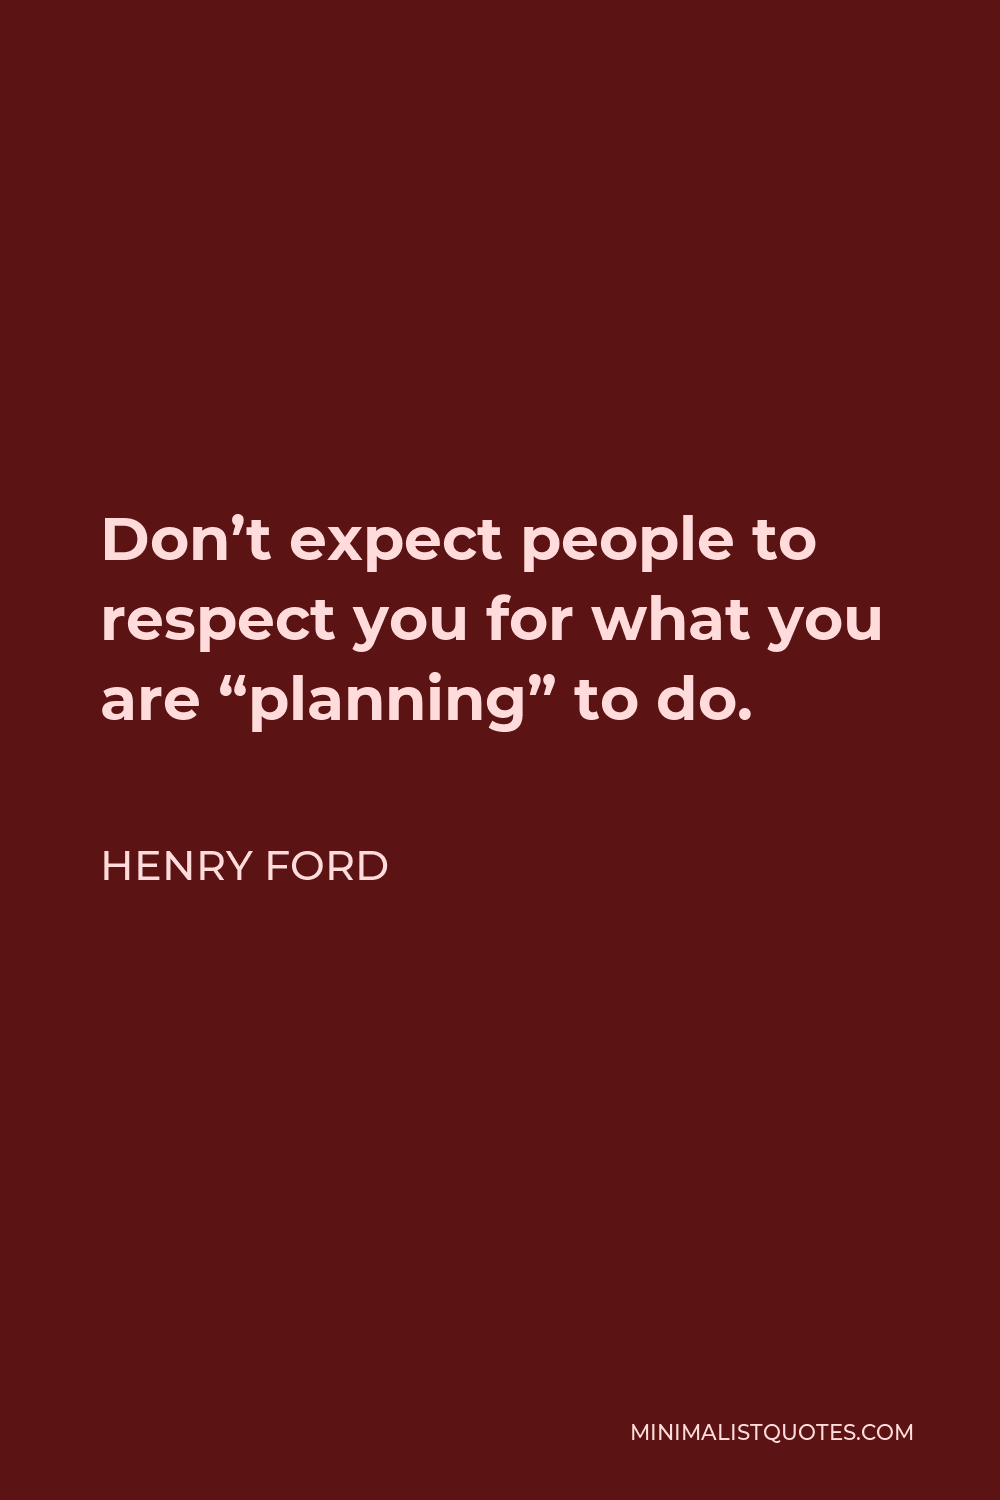 Henry Ford Quote - Don’t expect people to respect you for what you are “planning” to do.